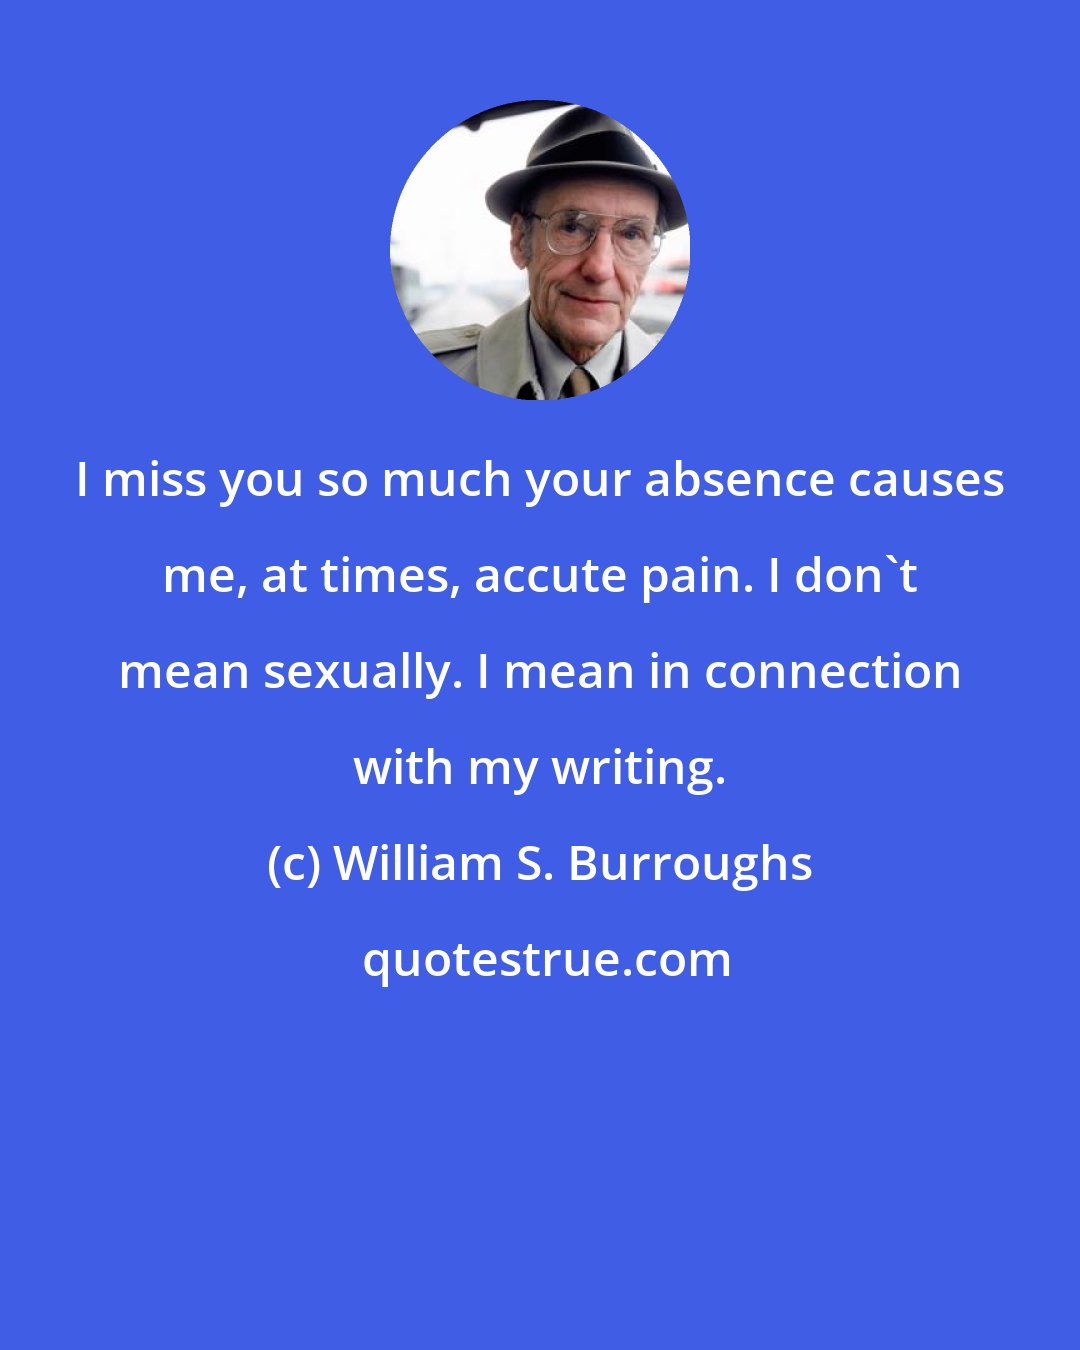 William S. Burroughs: I miss you so much your absence causes me, at times, accute pain. I don't mean sexually. I mean in connection with my writing.